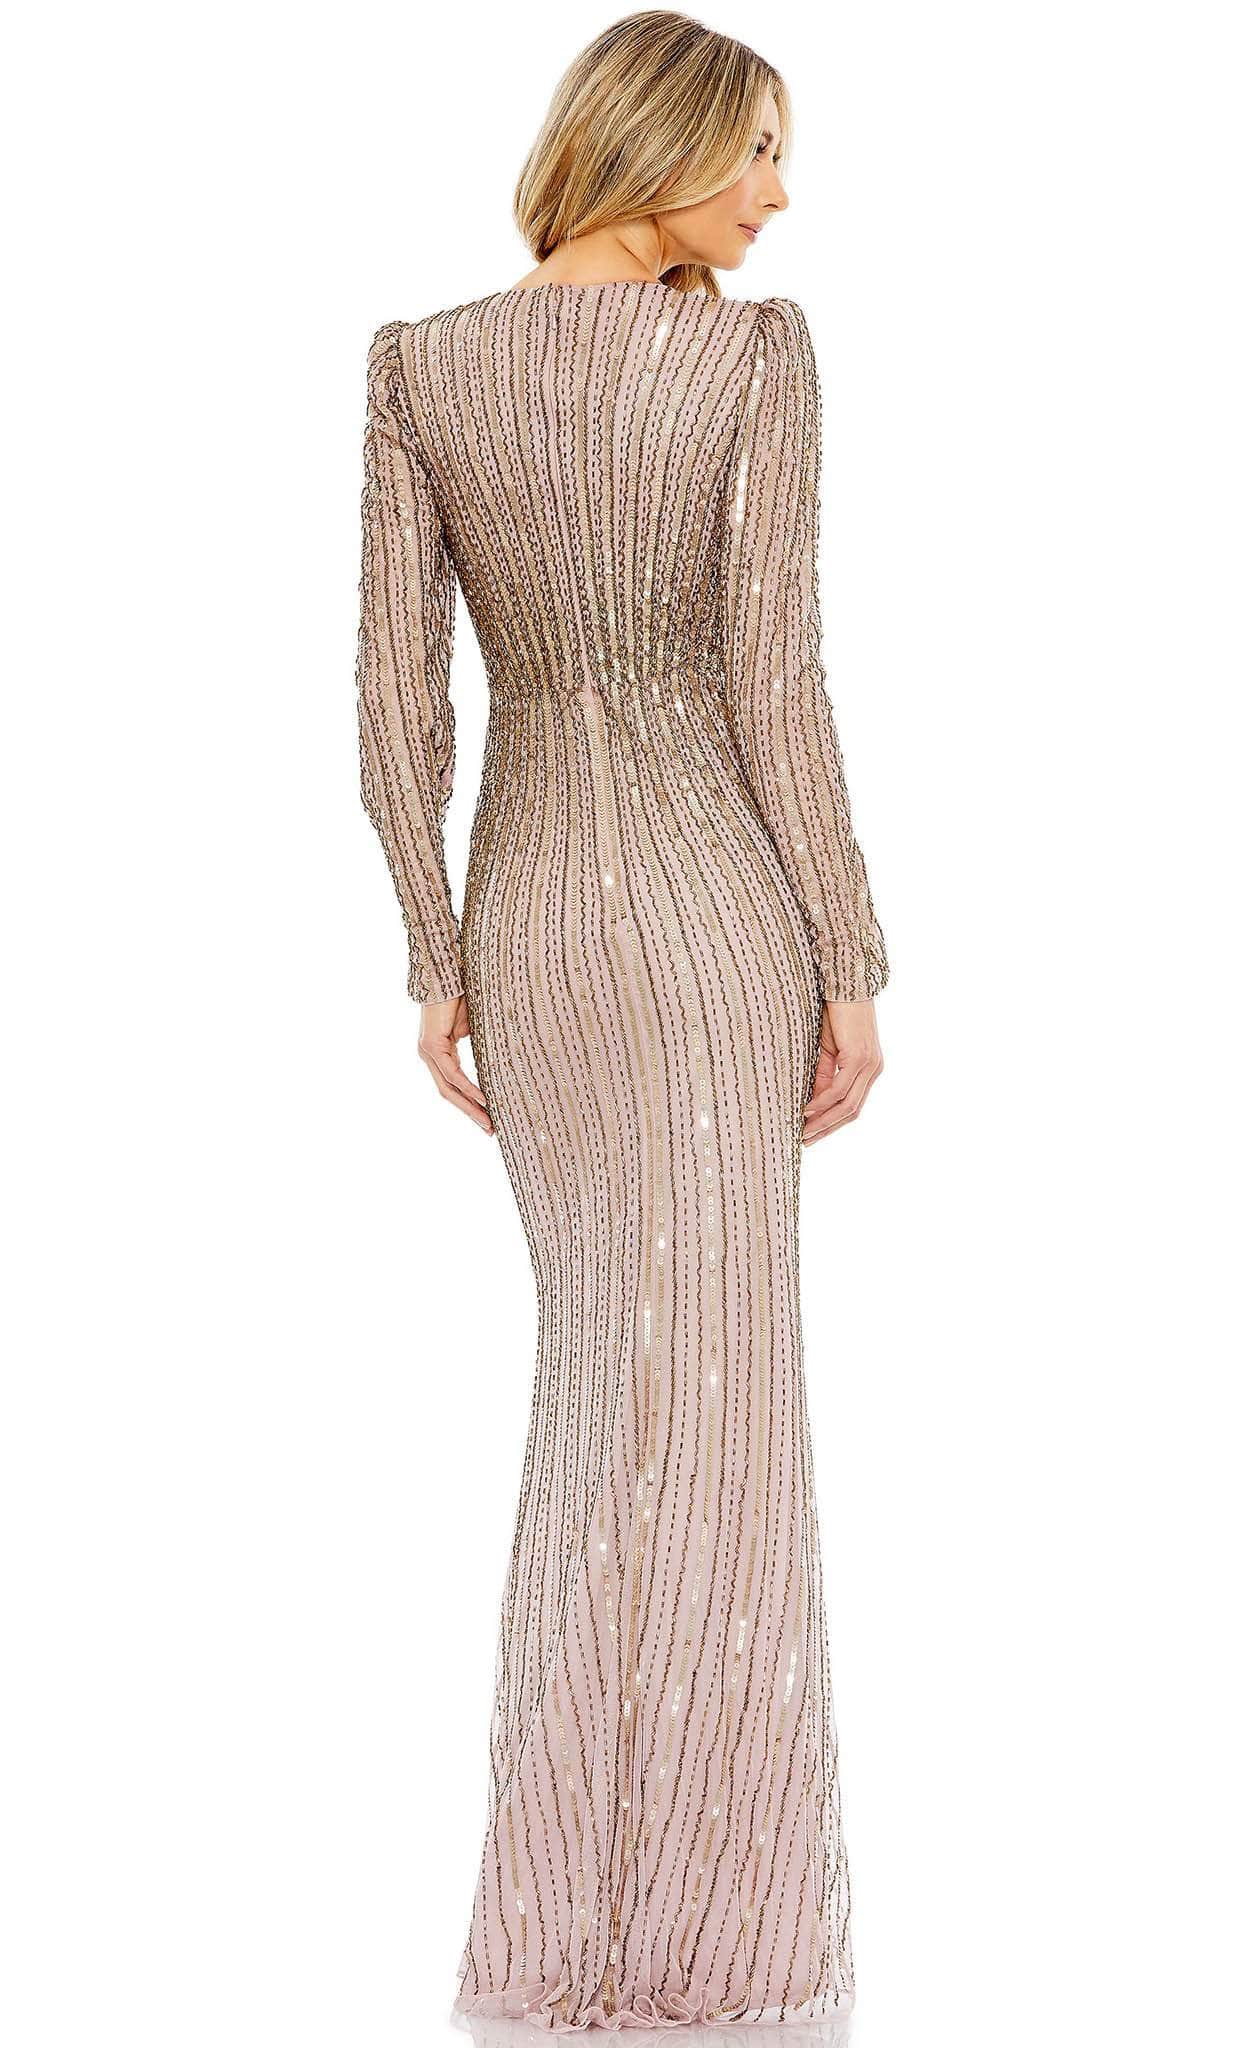 Mac Duggal 5641 - Long Sleeve Embellished Evening Dress Special Occasion Dress